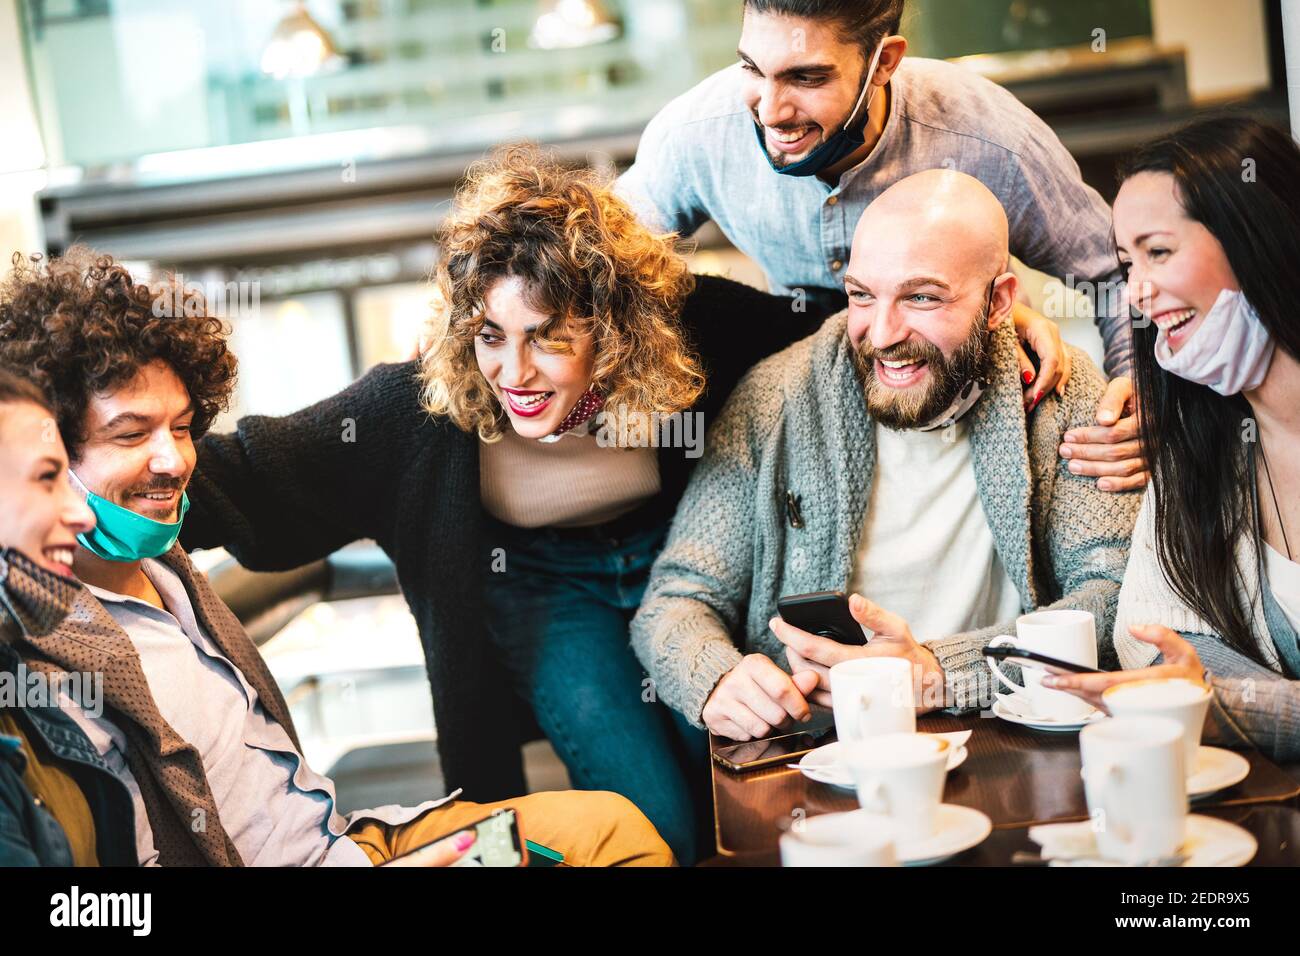 People having fun drinking cappuccino at coffeehouse - Young friends talking together at restaurant cafeteria - New normal gathering concept Stock Photo